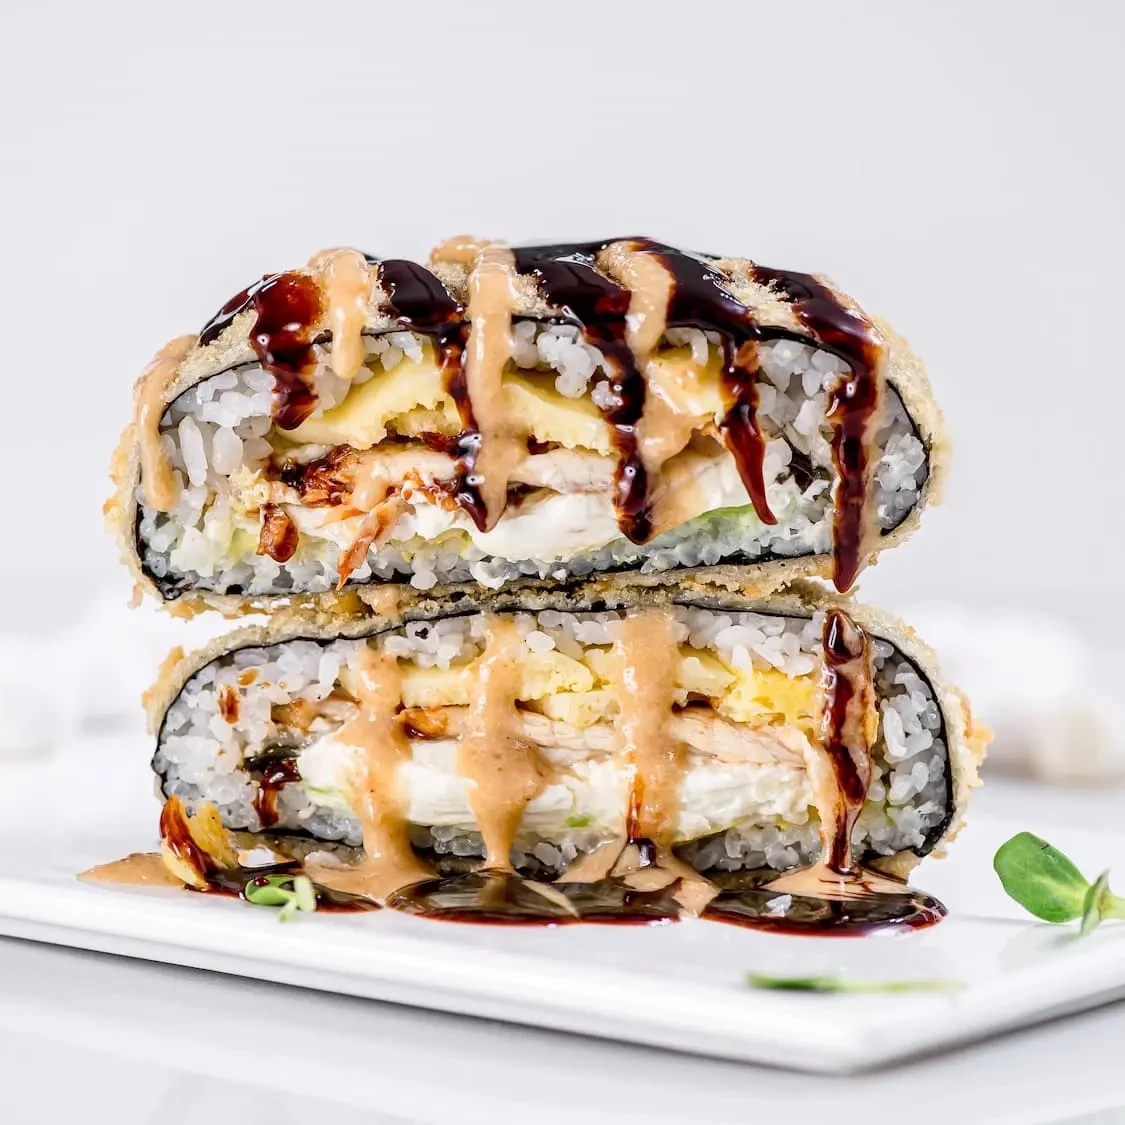 Sushi burger with eel